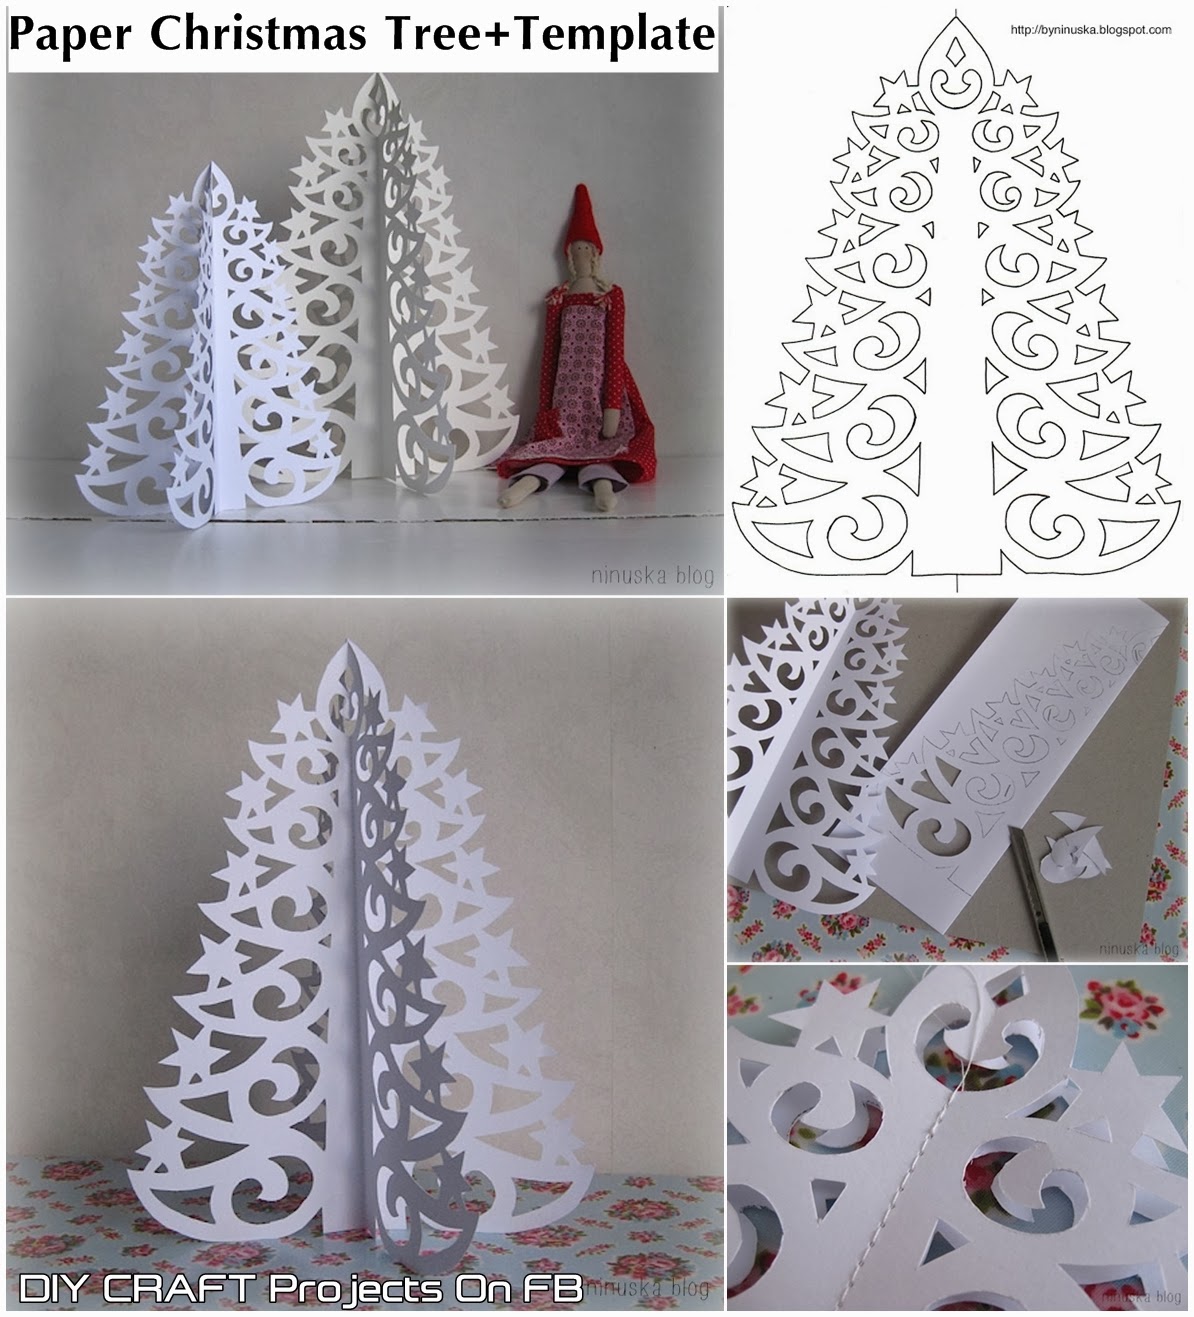 Paper Christmas Tree with Printable Template step by step